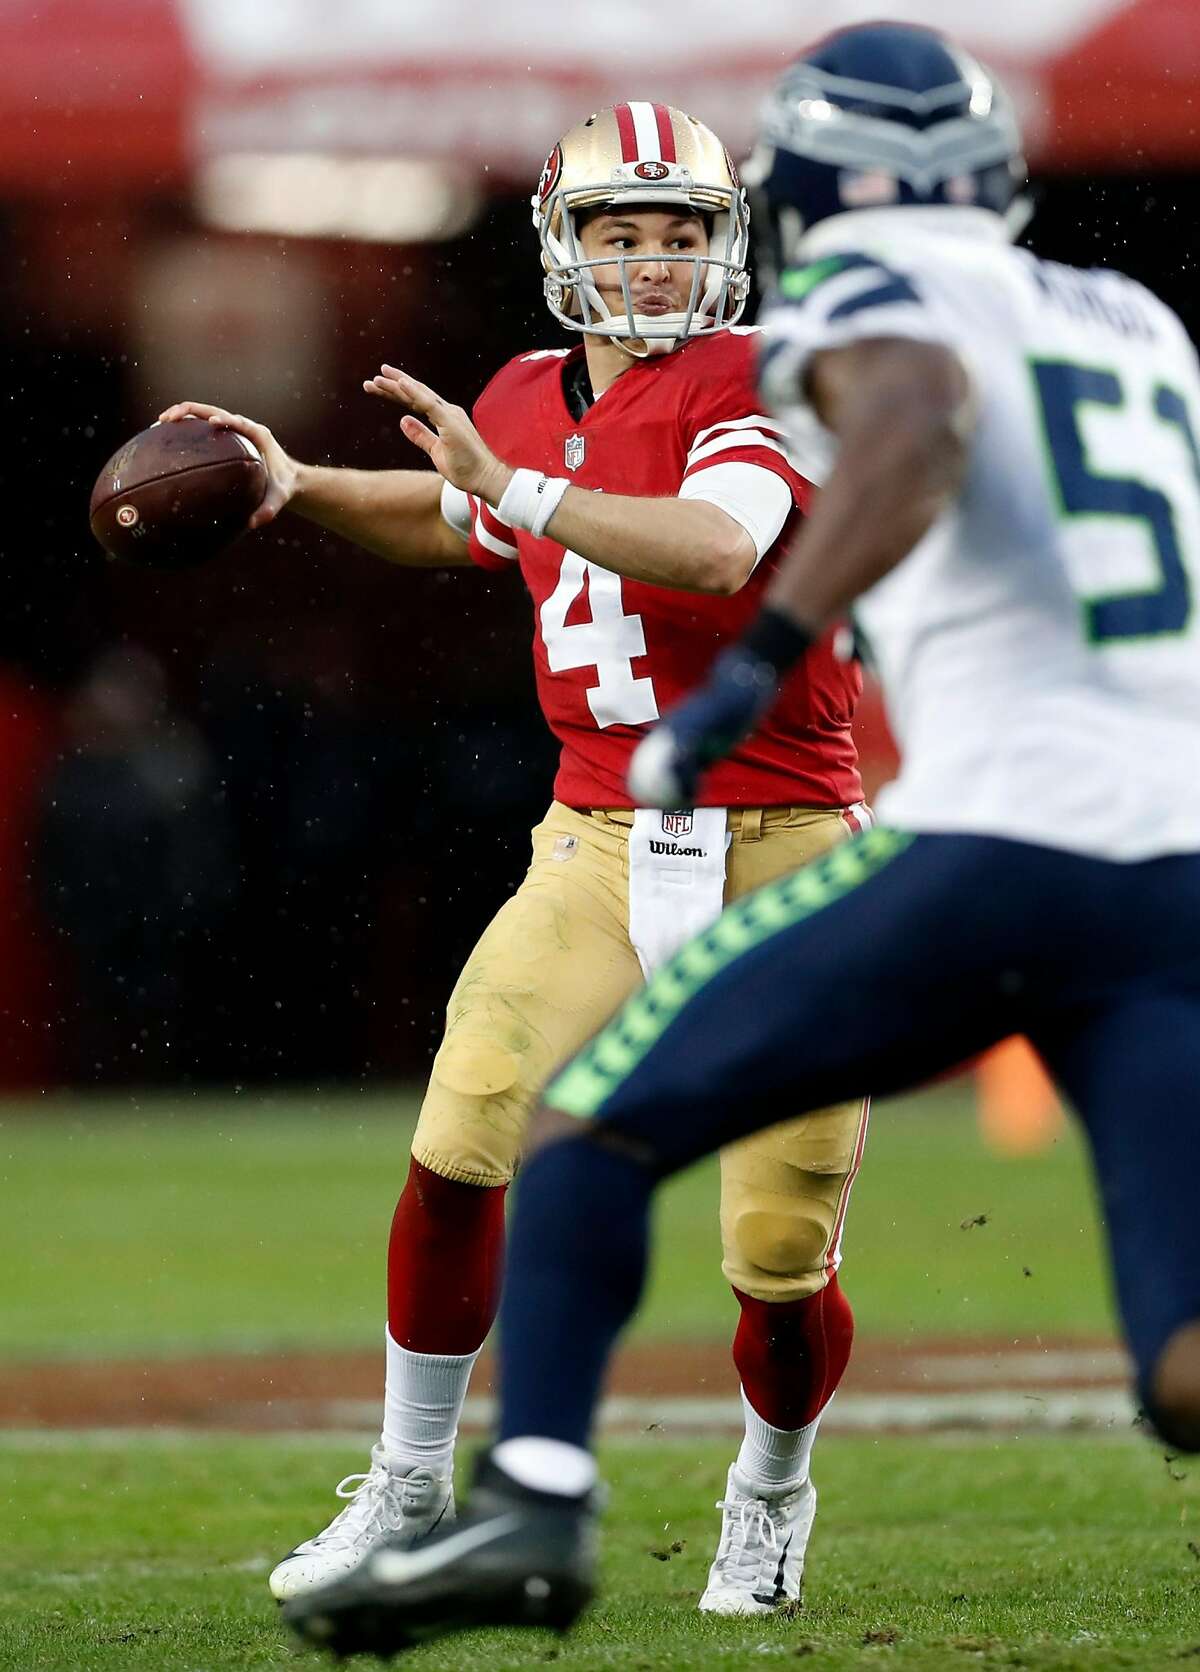 San Francisco 49ers' Nick Mullens passes against Seattle Seahawks during Niners' 26-23 win in overtime in NFL game at Levi's Stadium in Santa Clara, Calif. on Sunday, December 16, 2018.